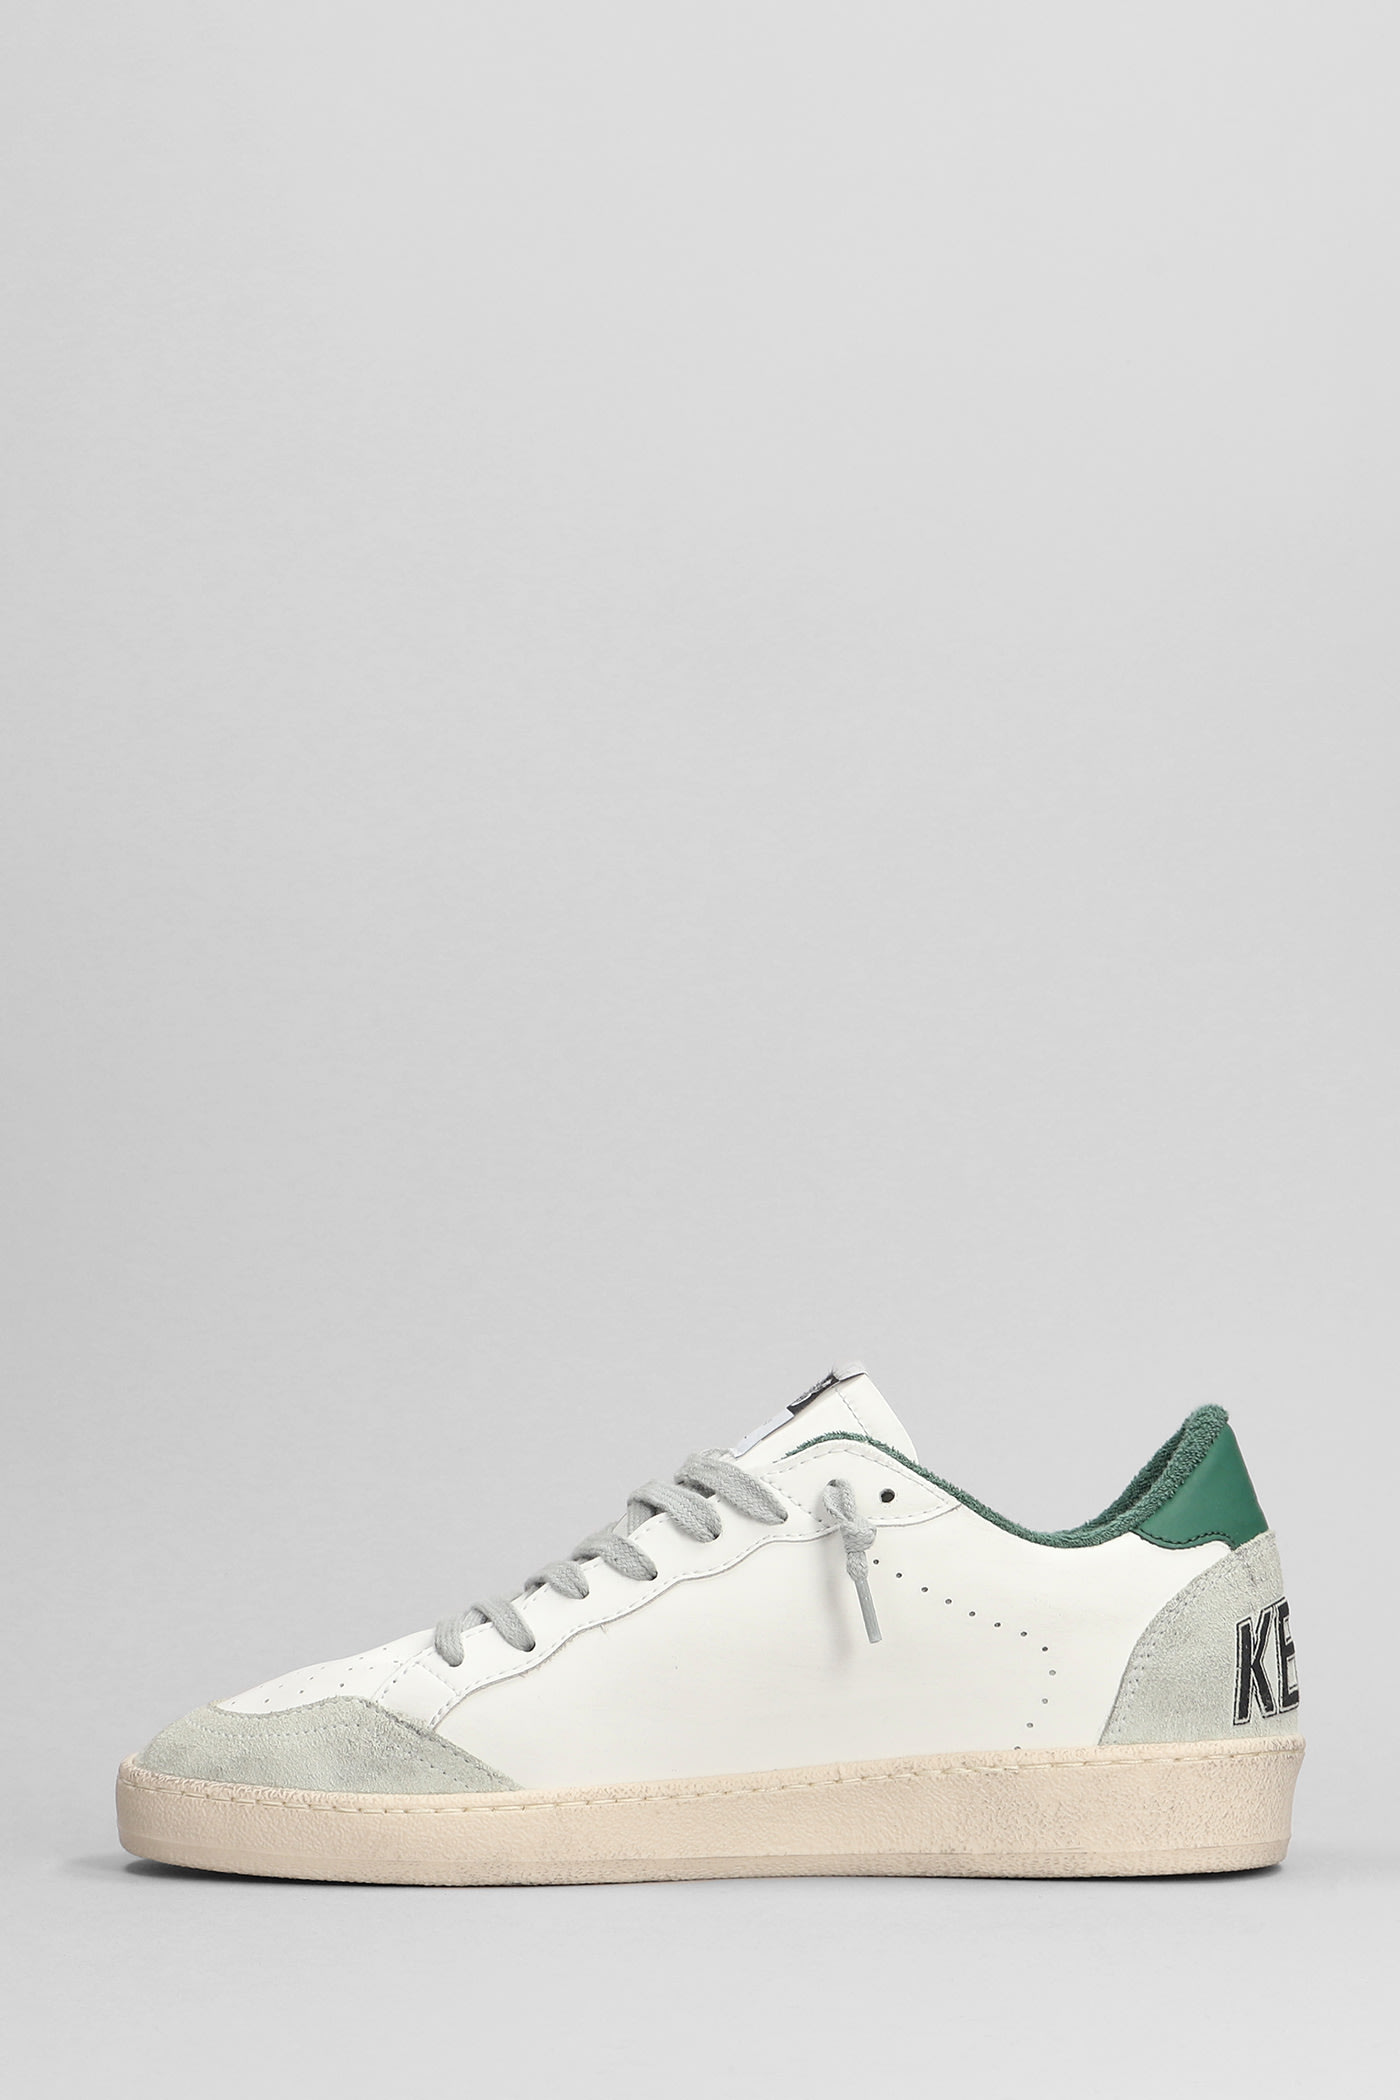 Shop Golden Goose Ball Star Sneakers In White Suede And Leather